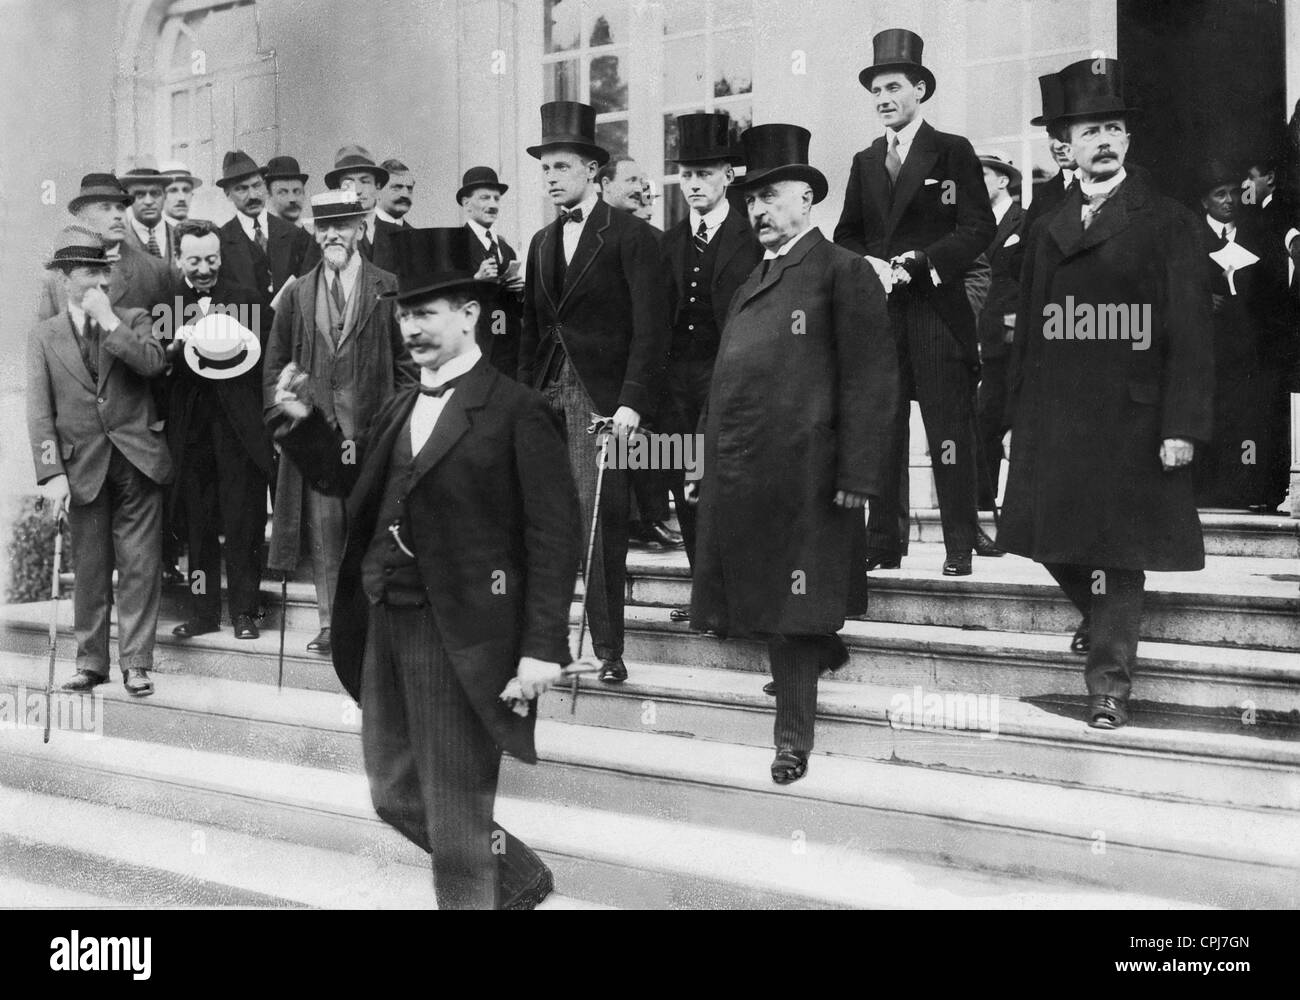 The Spa Conference, 1920 - The German delegation Stock Photo